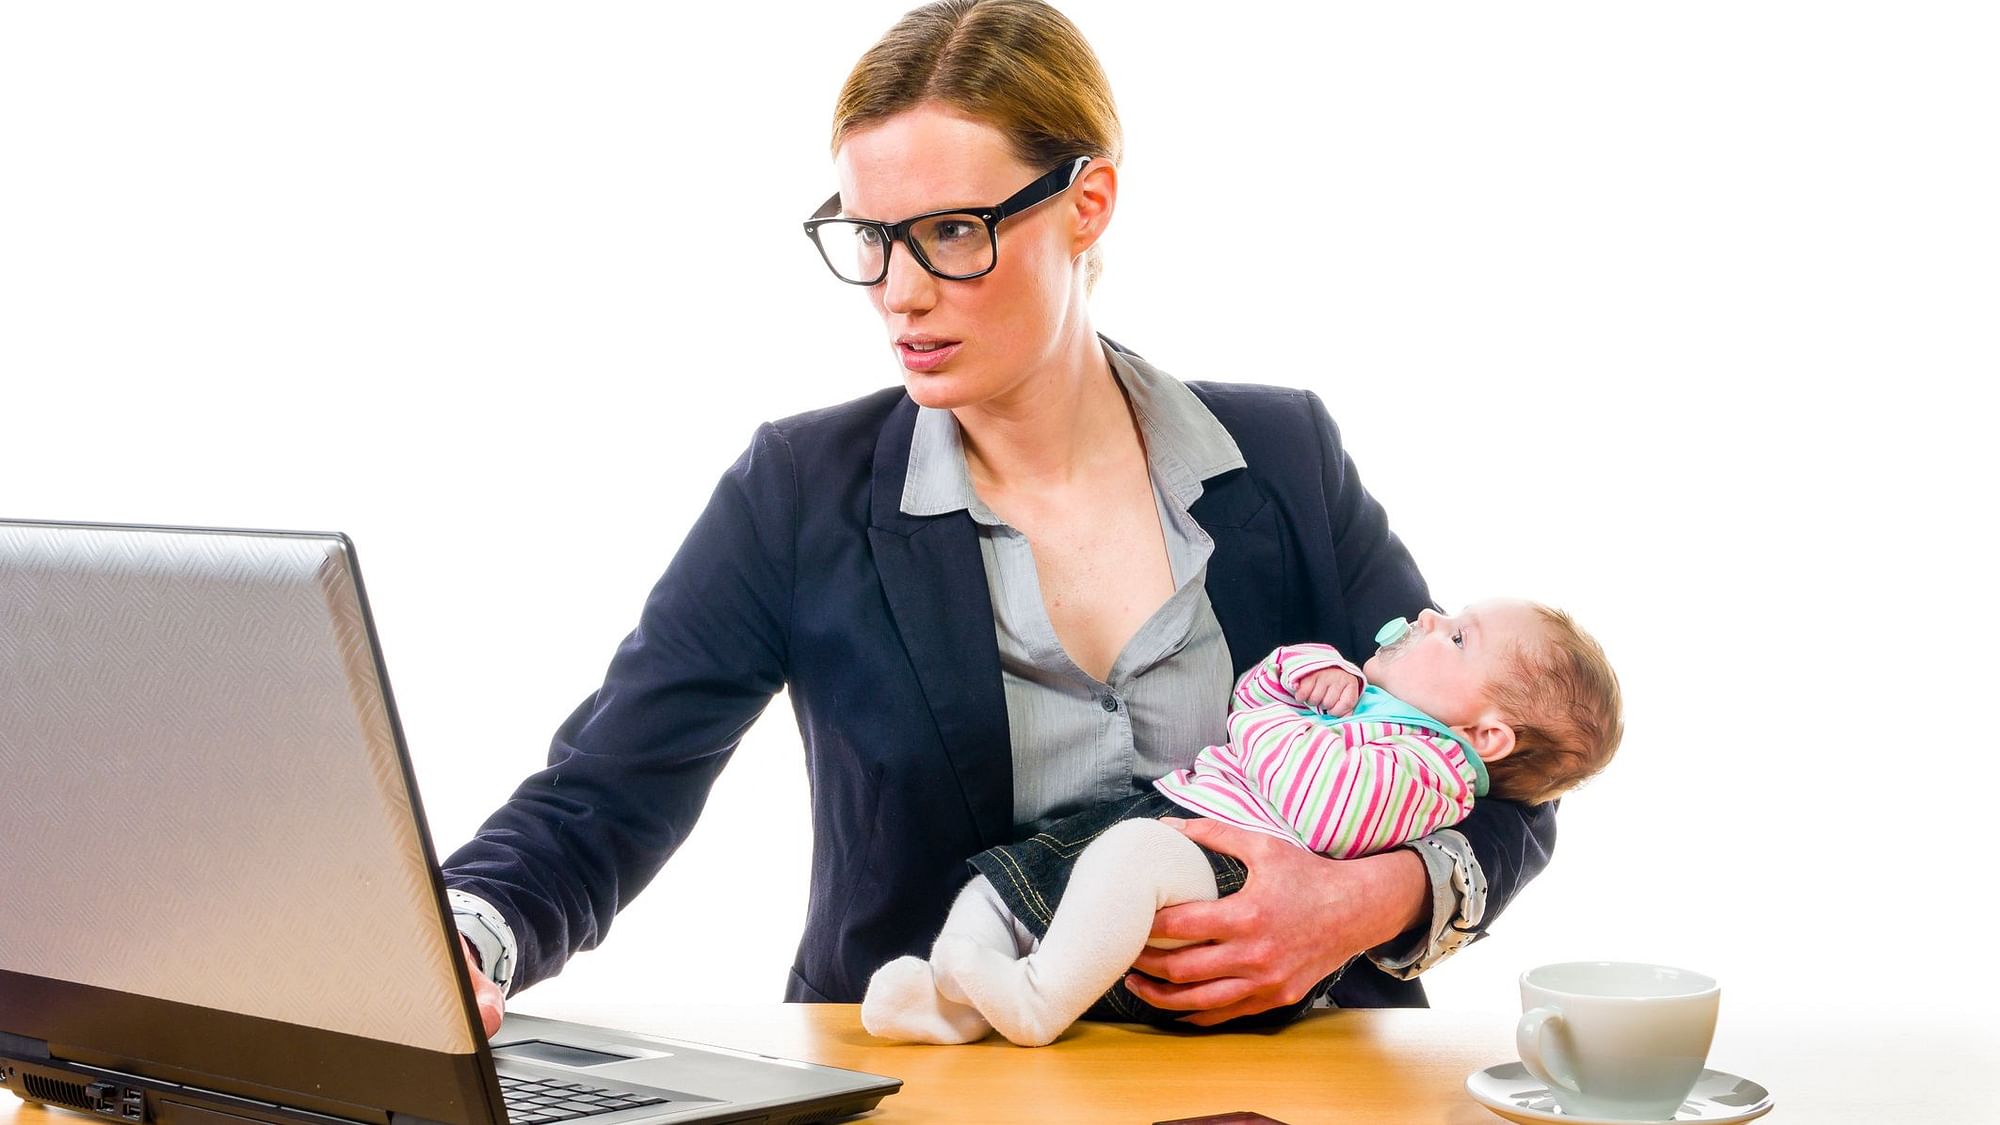 ‘Working moms’, by the way, is such an incongruity of a term.